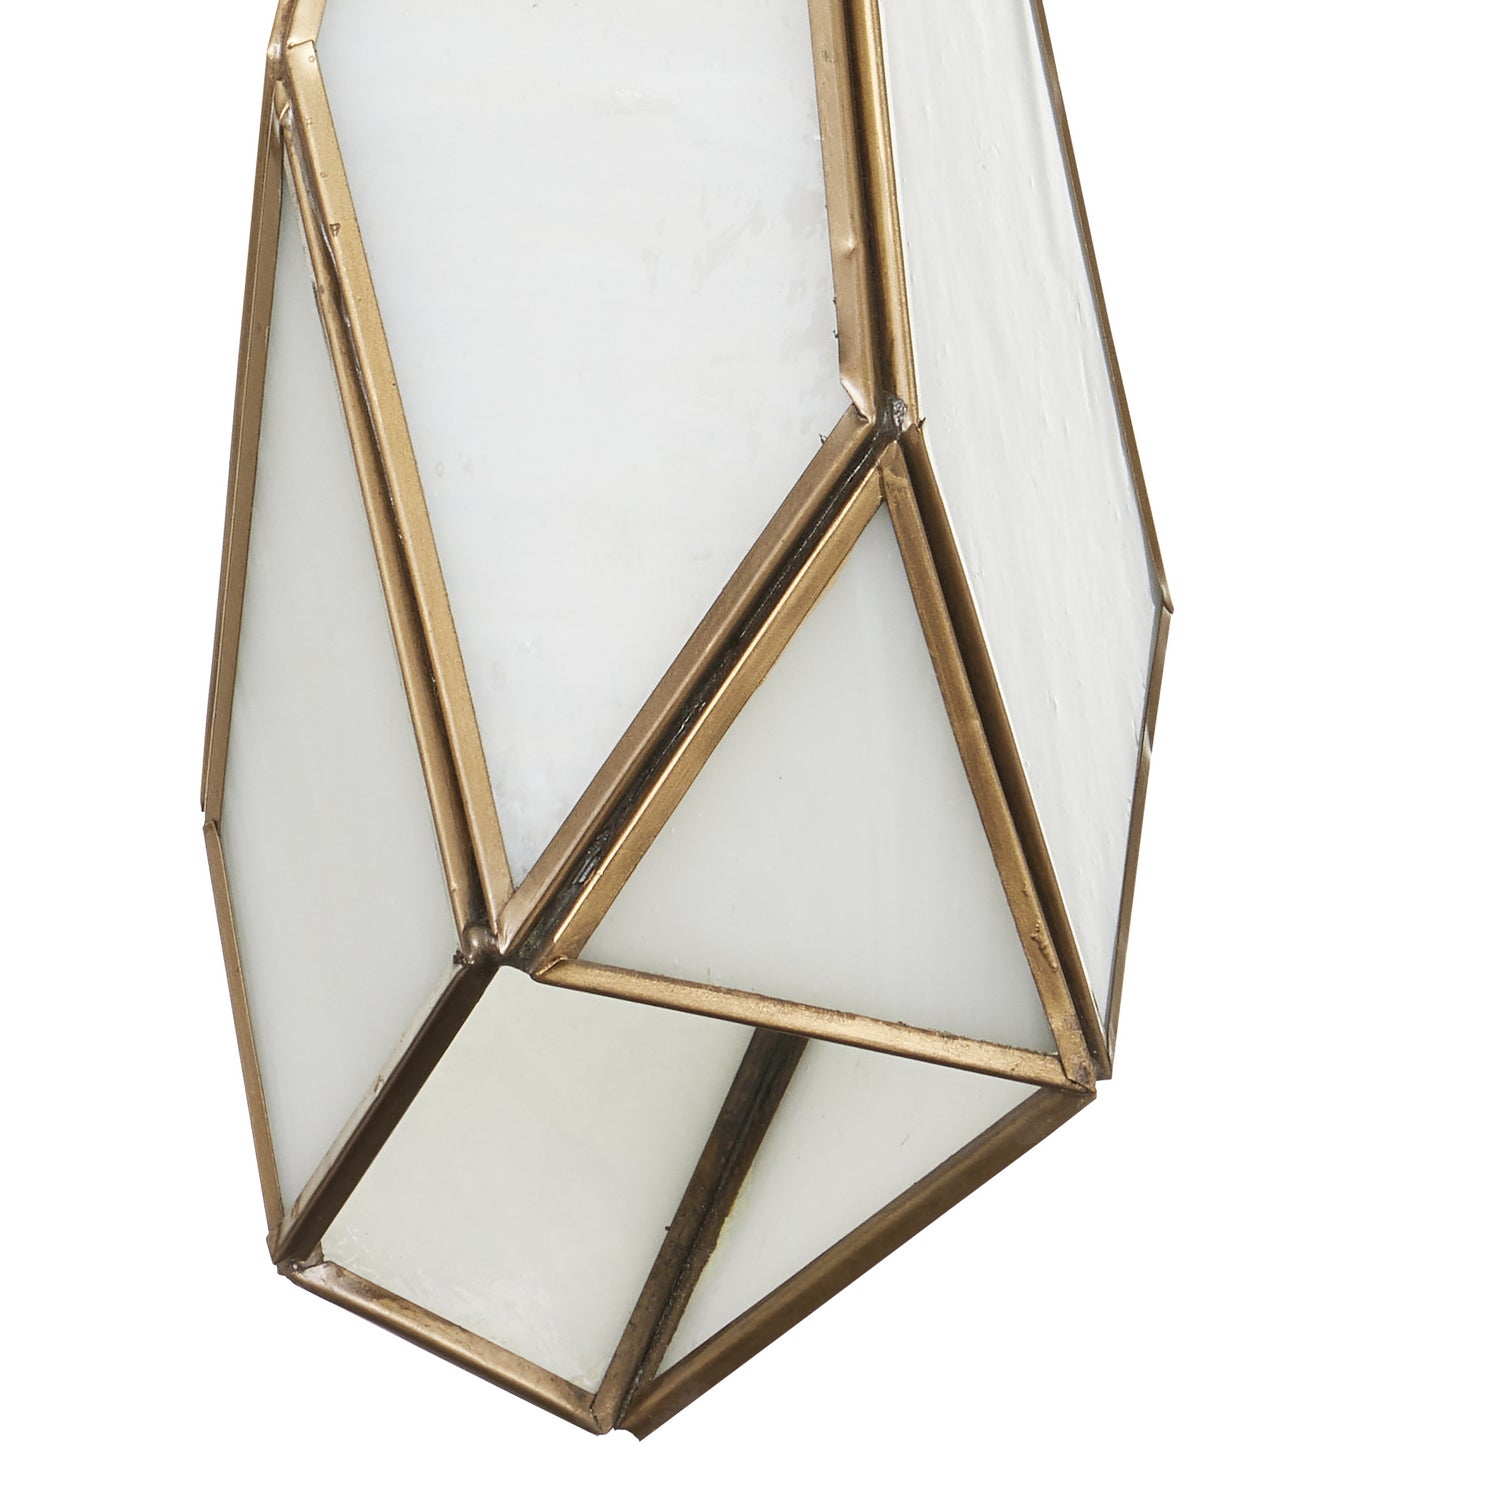 36 Light Pendant from the Glace collection in White/Antique Brass/Silver finish